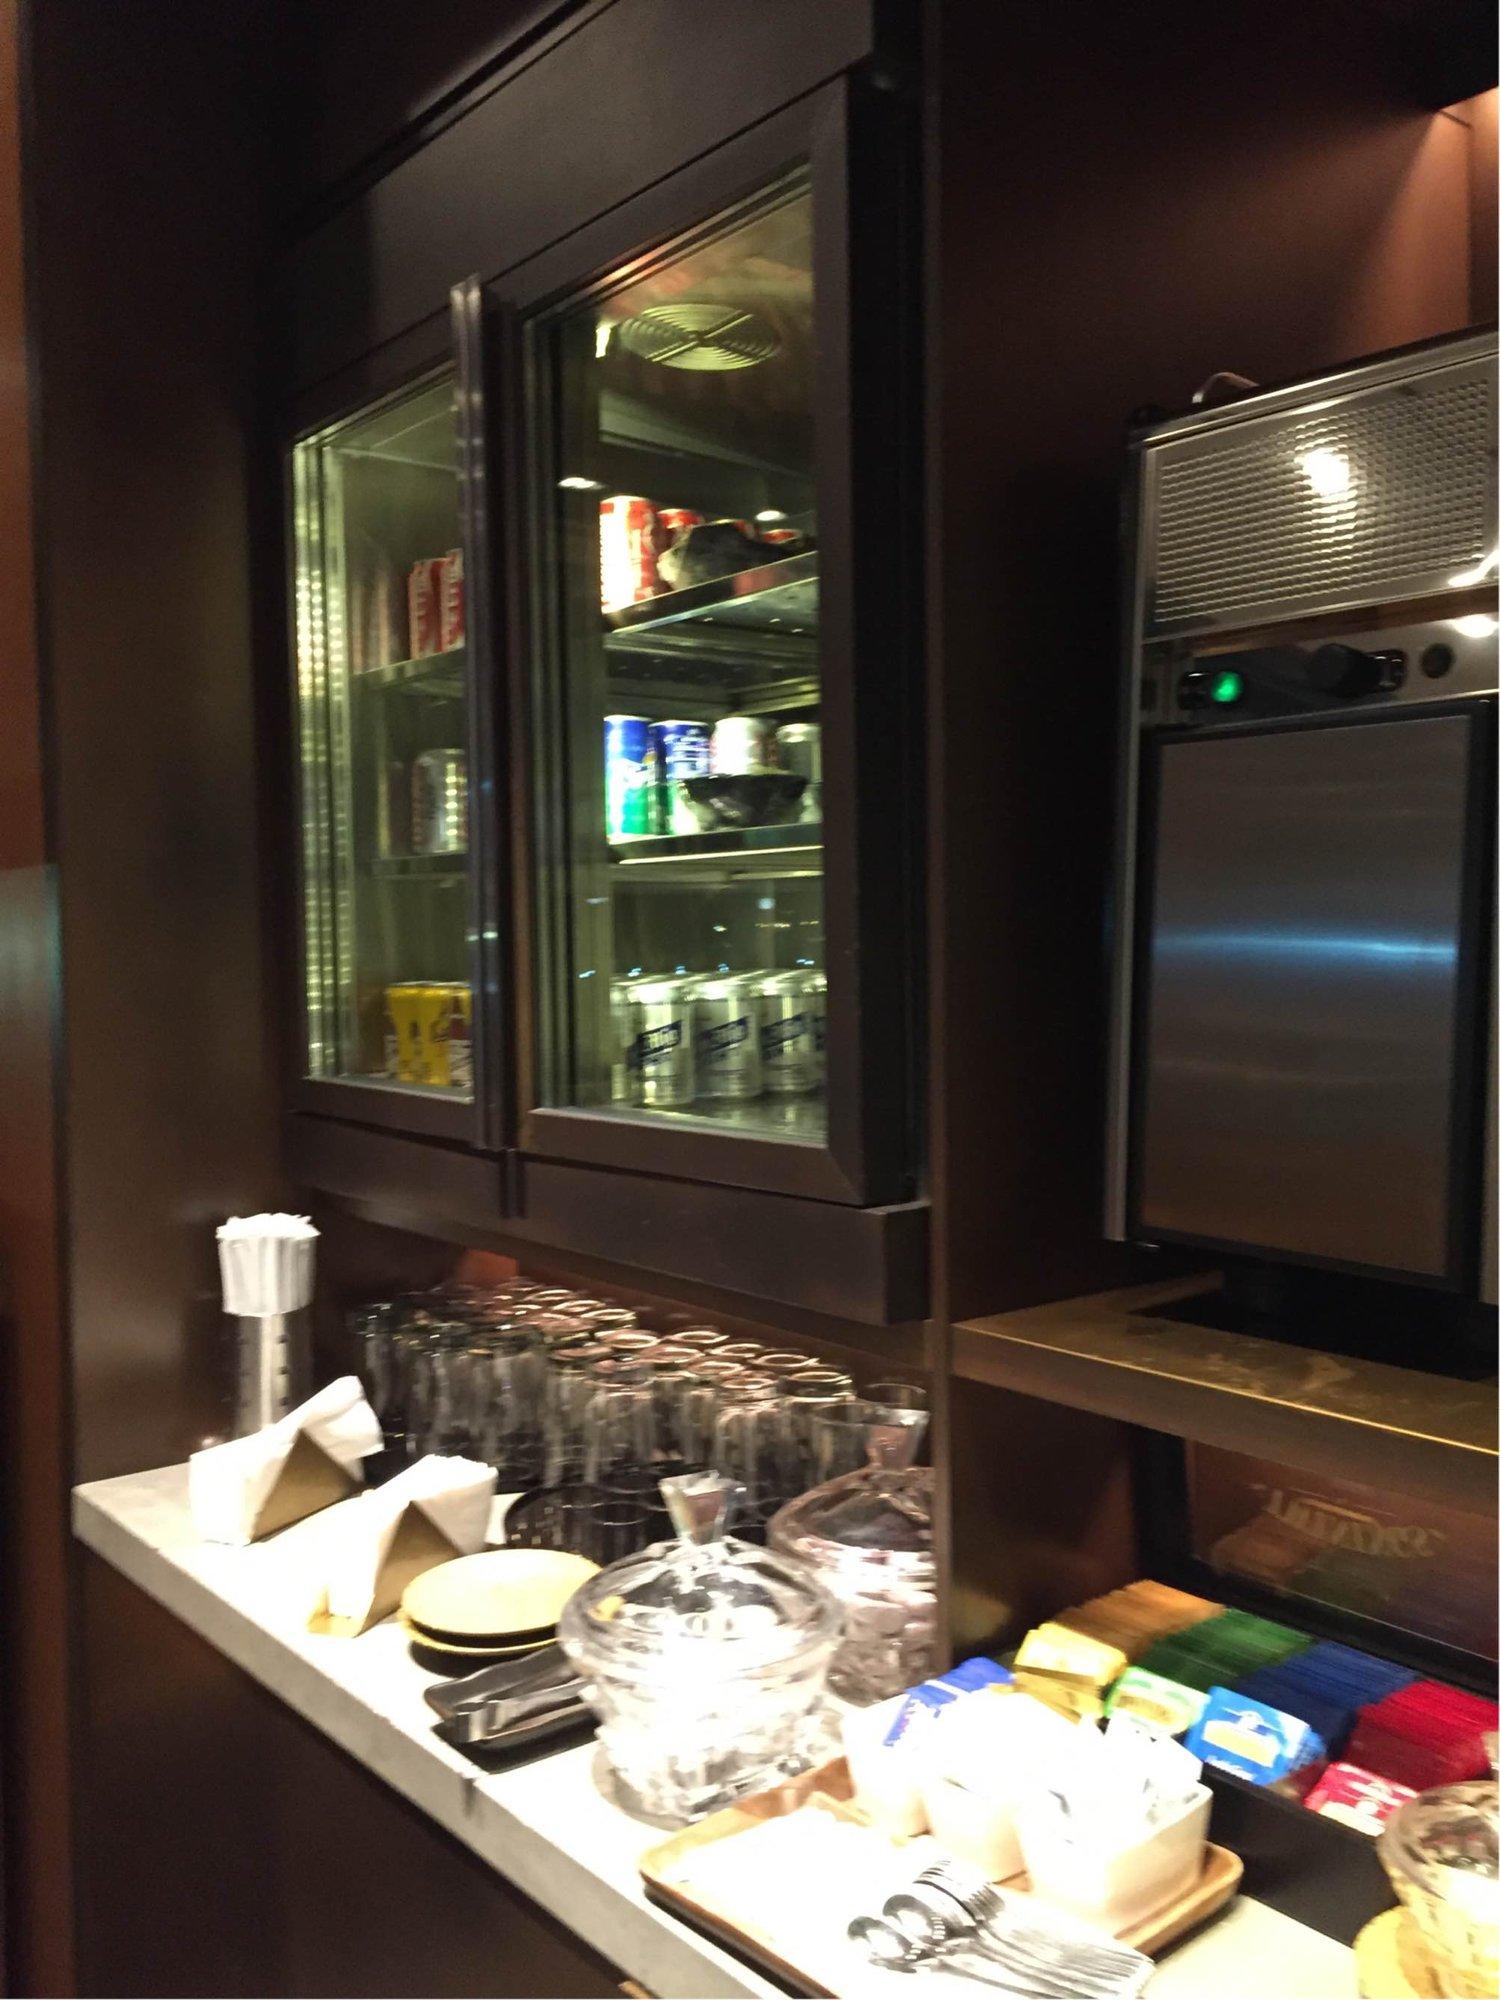 Cathay Pacific First and Business Class Lounge image 18 of 19